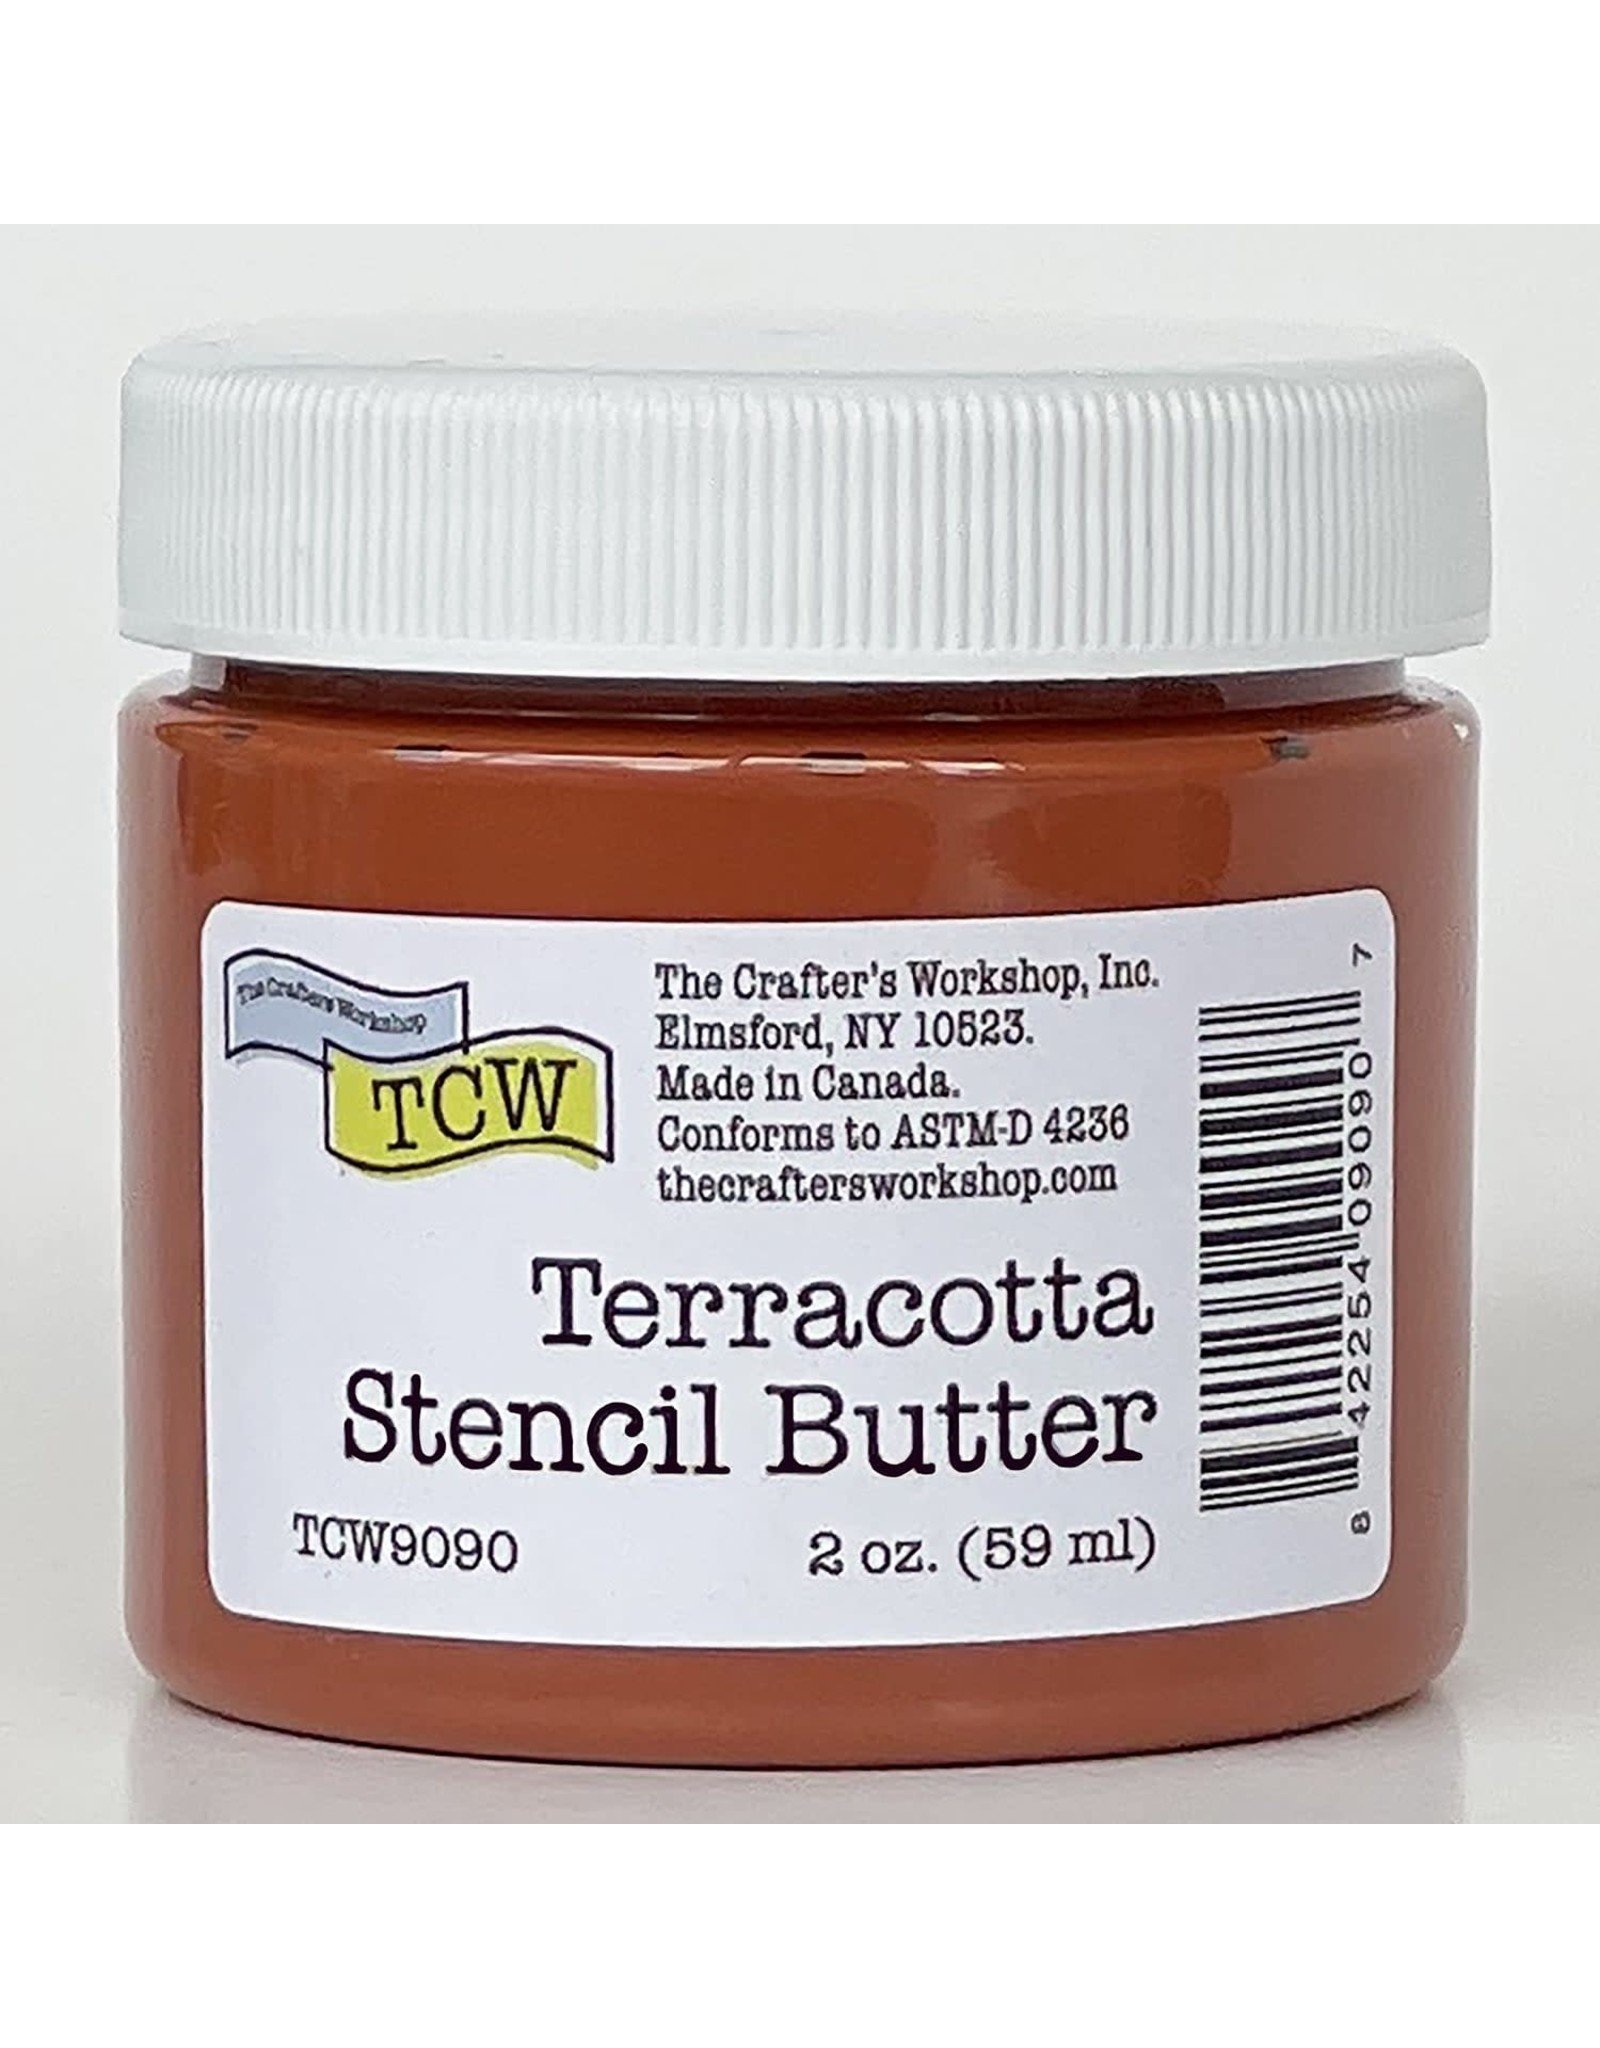 CRAFTERS WORKSHOP THE CRAFTERS WORKSHOP TERRACOTTA STENCIL BUTTER 2oz